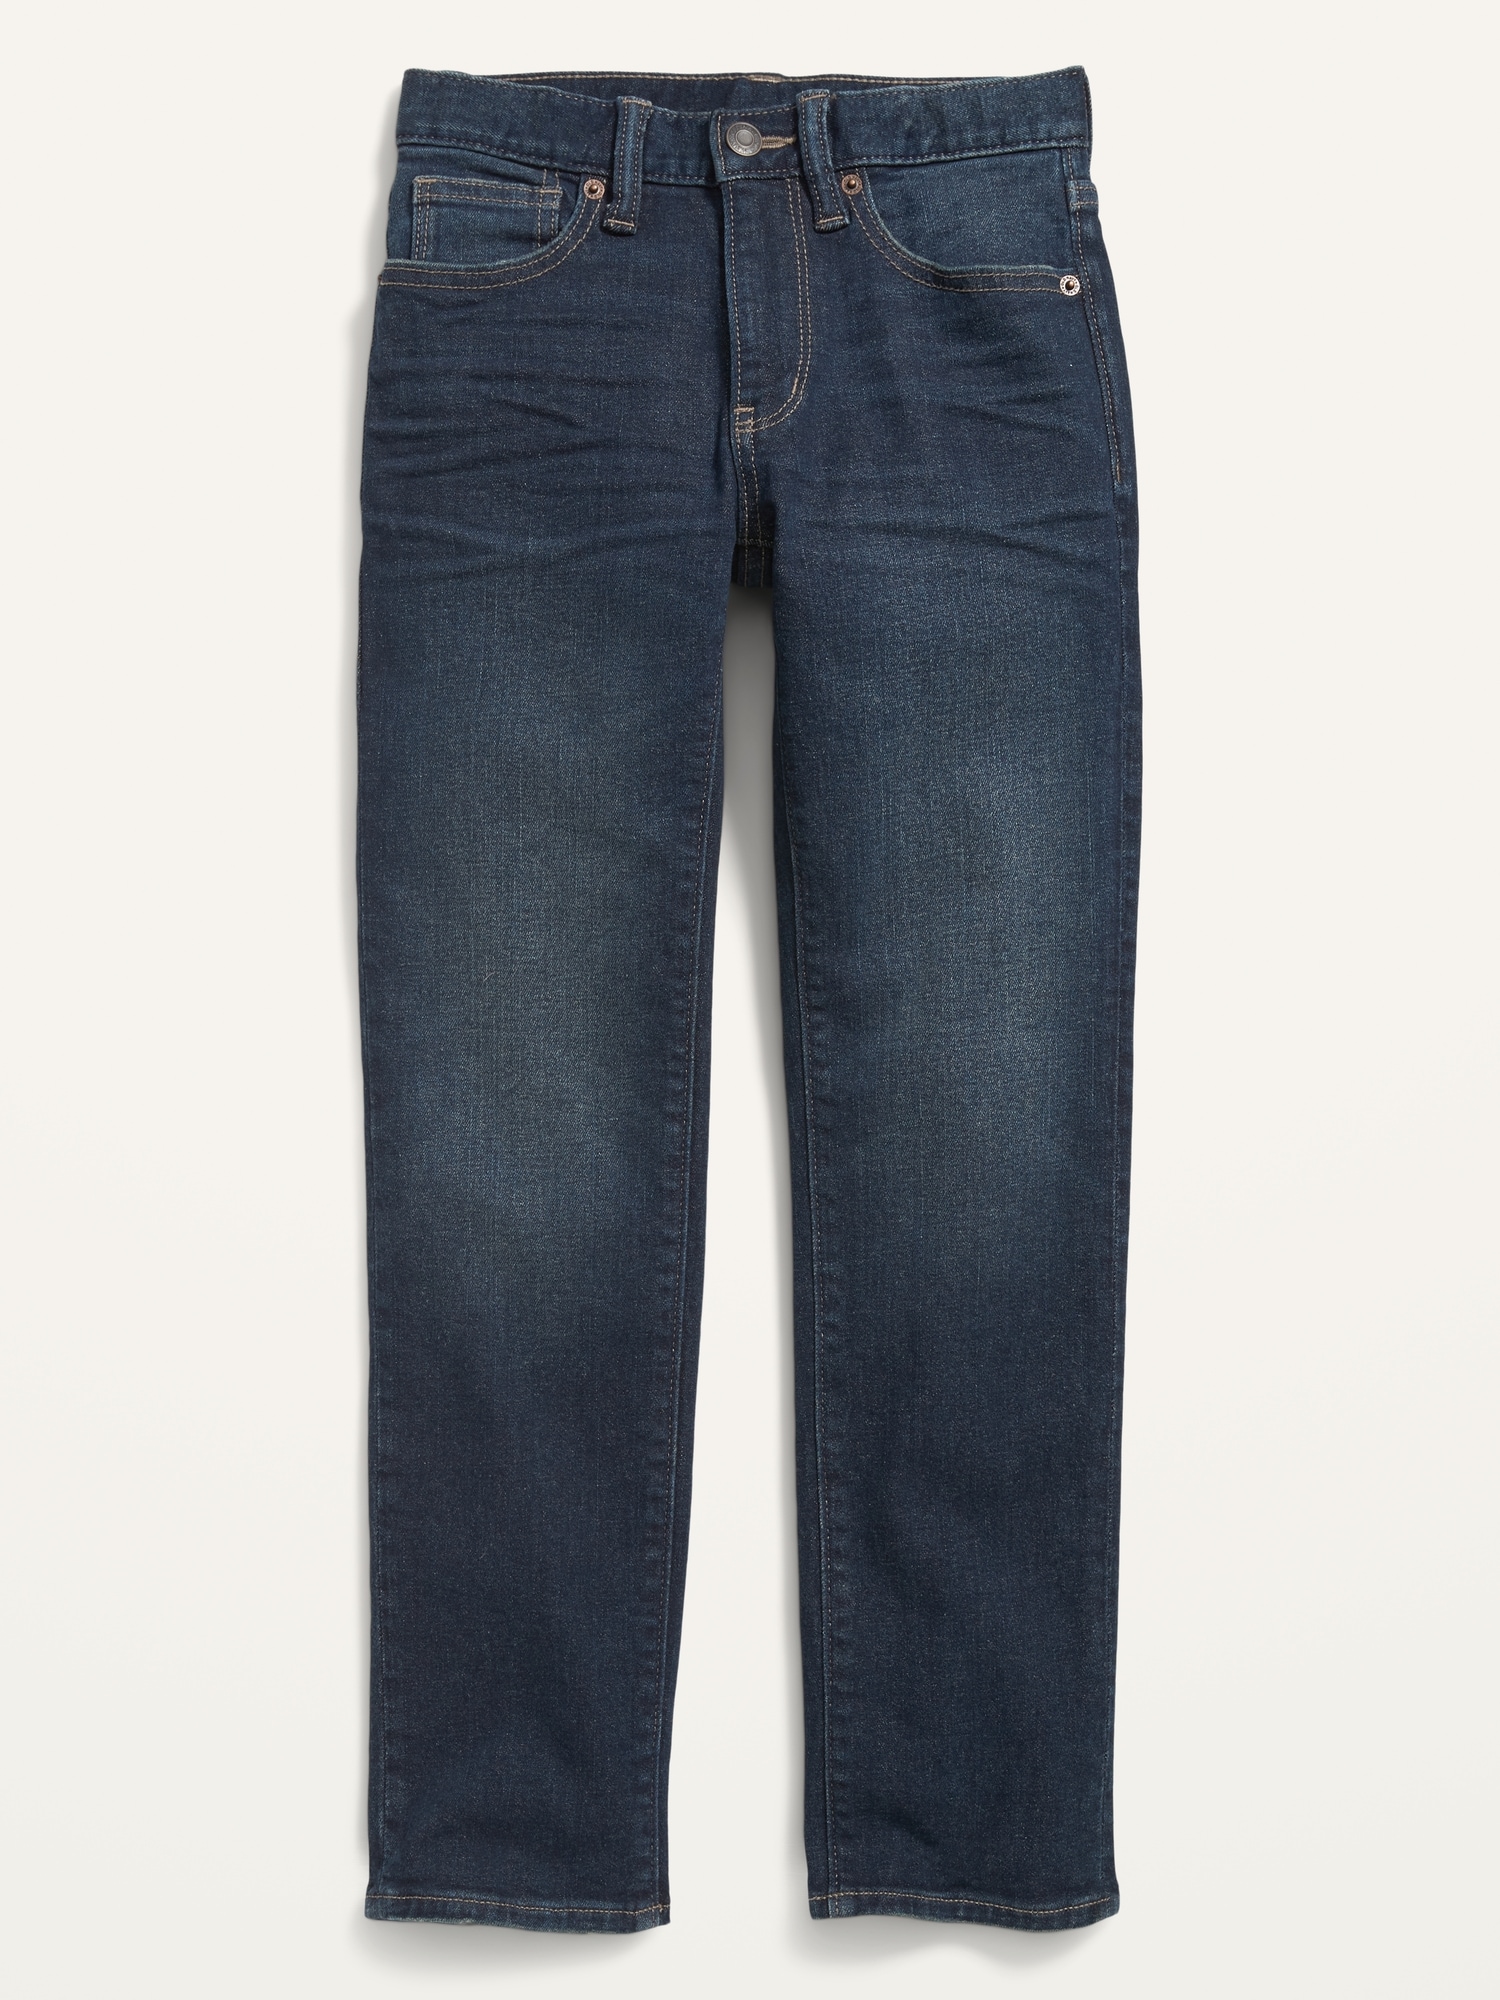 Skinny Jeans for Boys Old Navy